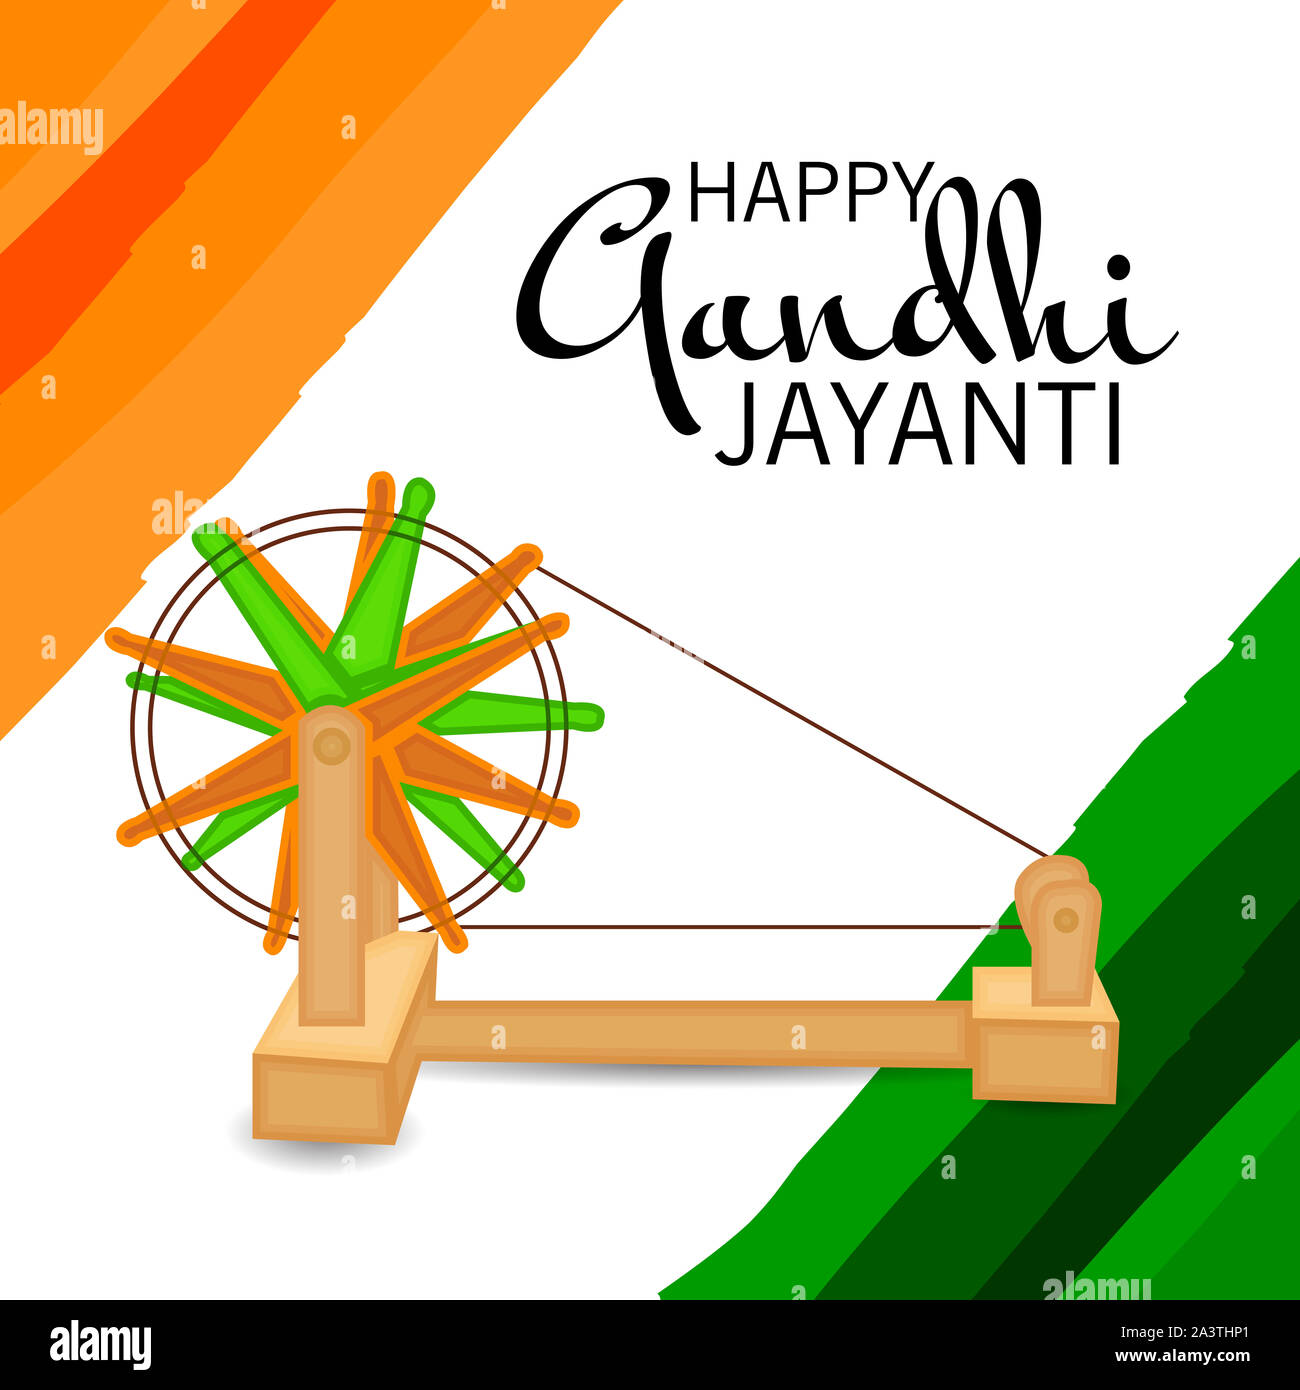 illustration of a background or poster for Happy Gandhi Jayanti or ...